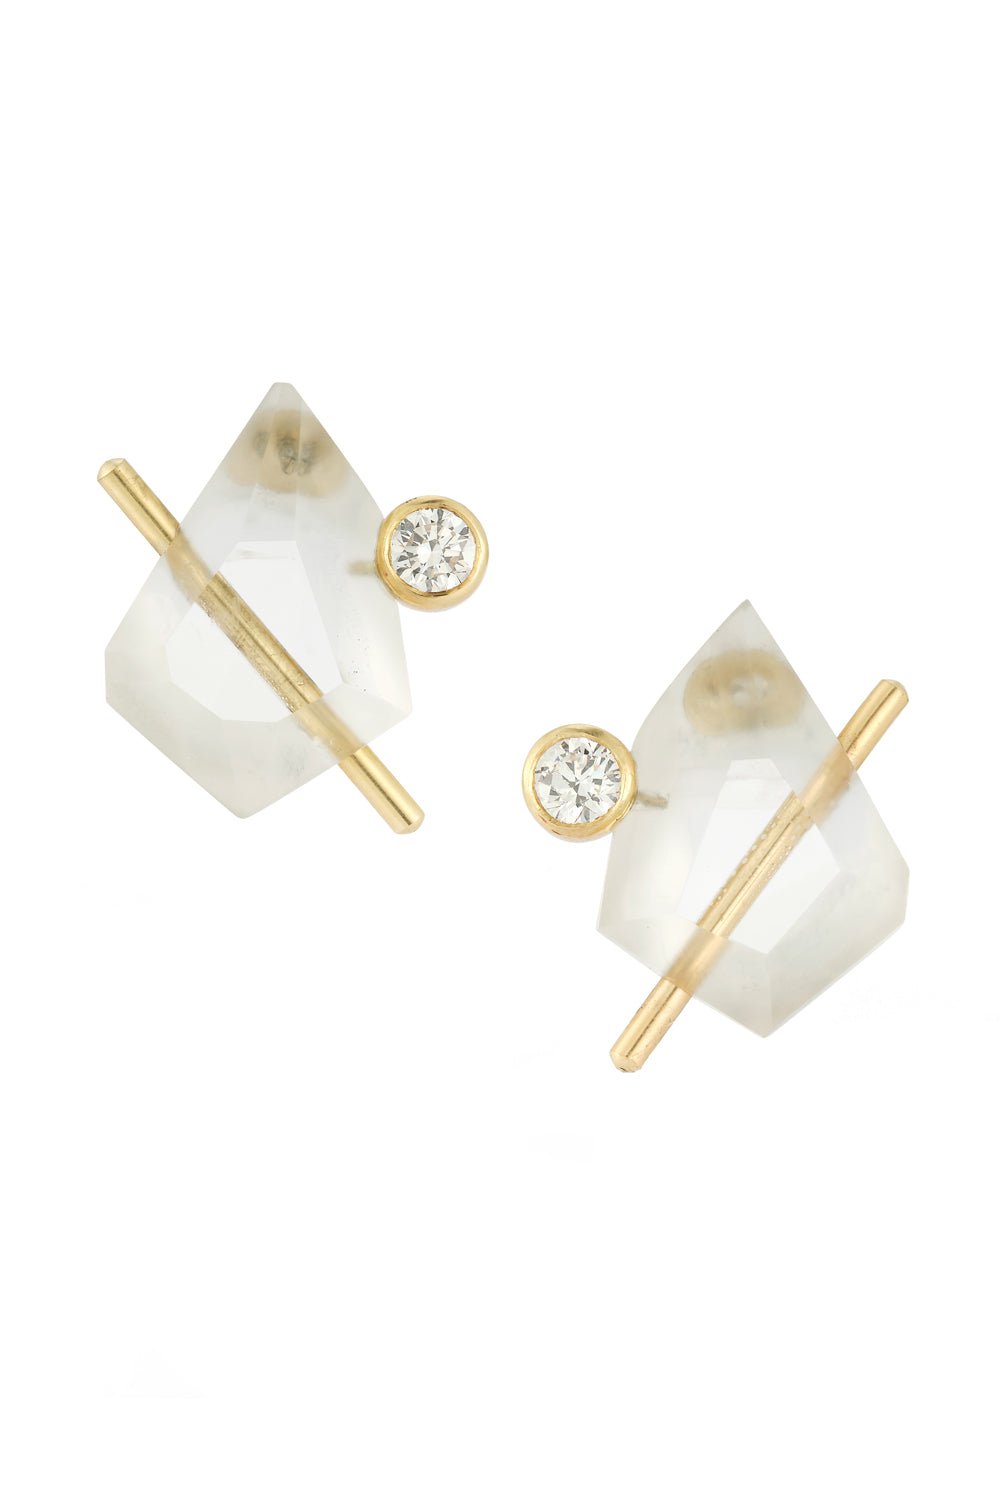 OLIVIA SHIH-Lucid Rock Studs-RECYCLED GOLD (WHEN POSSIBLE)